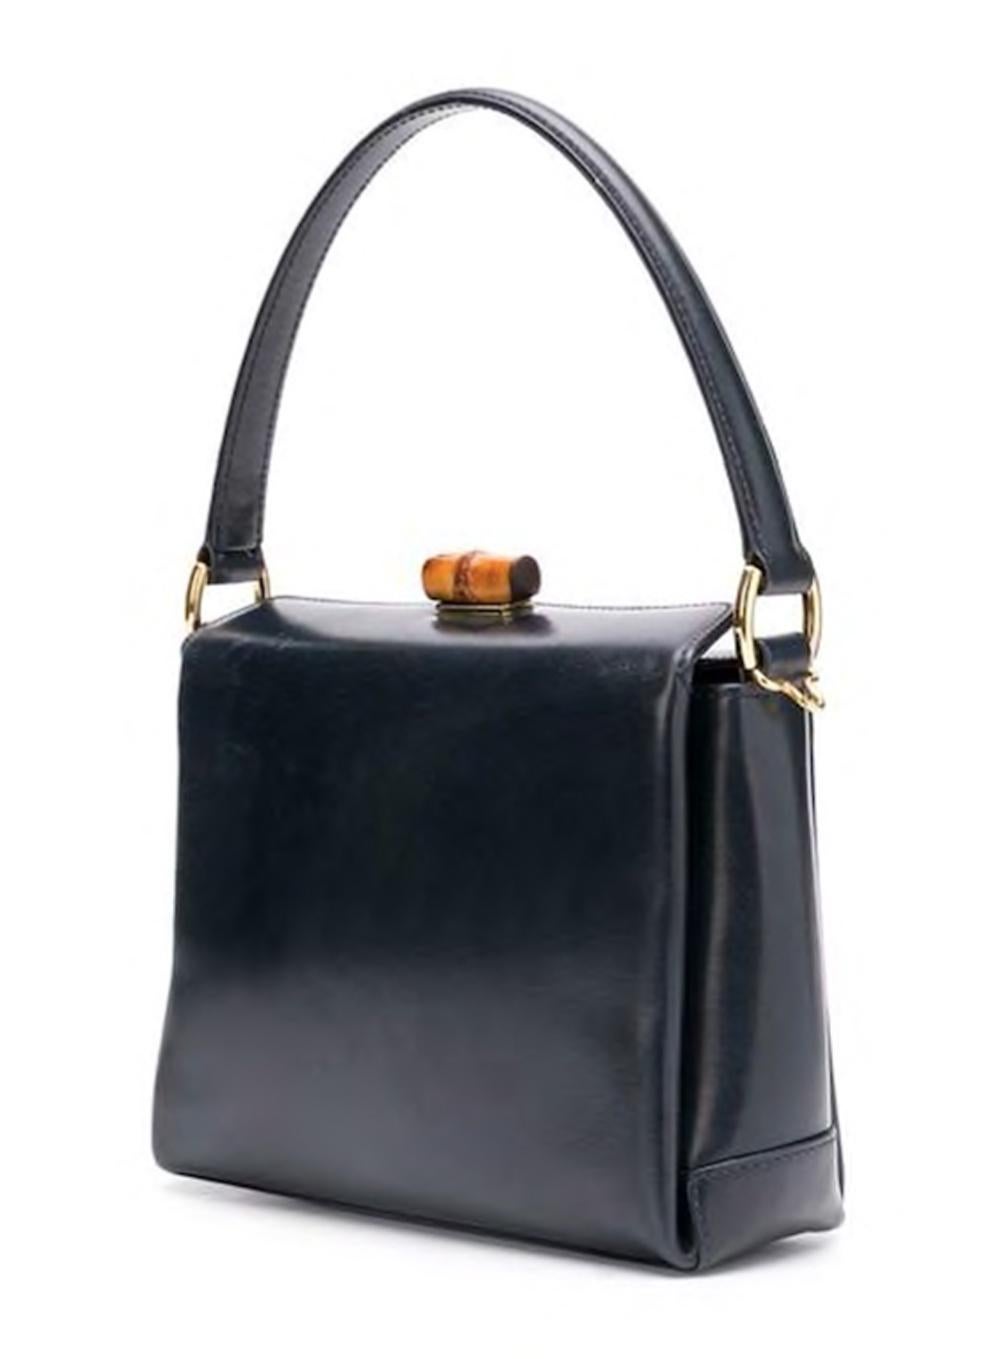 Gucci navy blue leather mini square tote bag featuring a round top handle, a Bamboo foldover top with twist-lock closure, a main internal compartment, an internal zipped pocket, an internal logo patch, gold-tone hardware and a structured design.